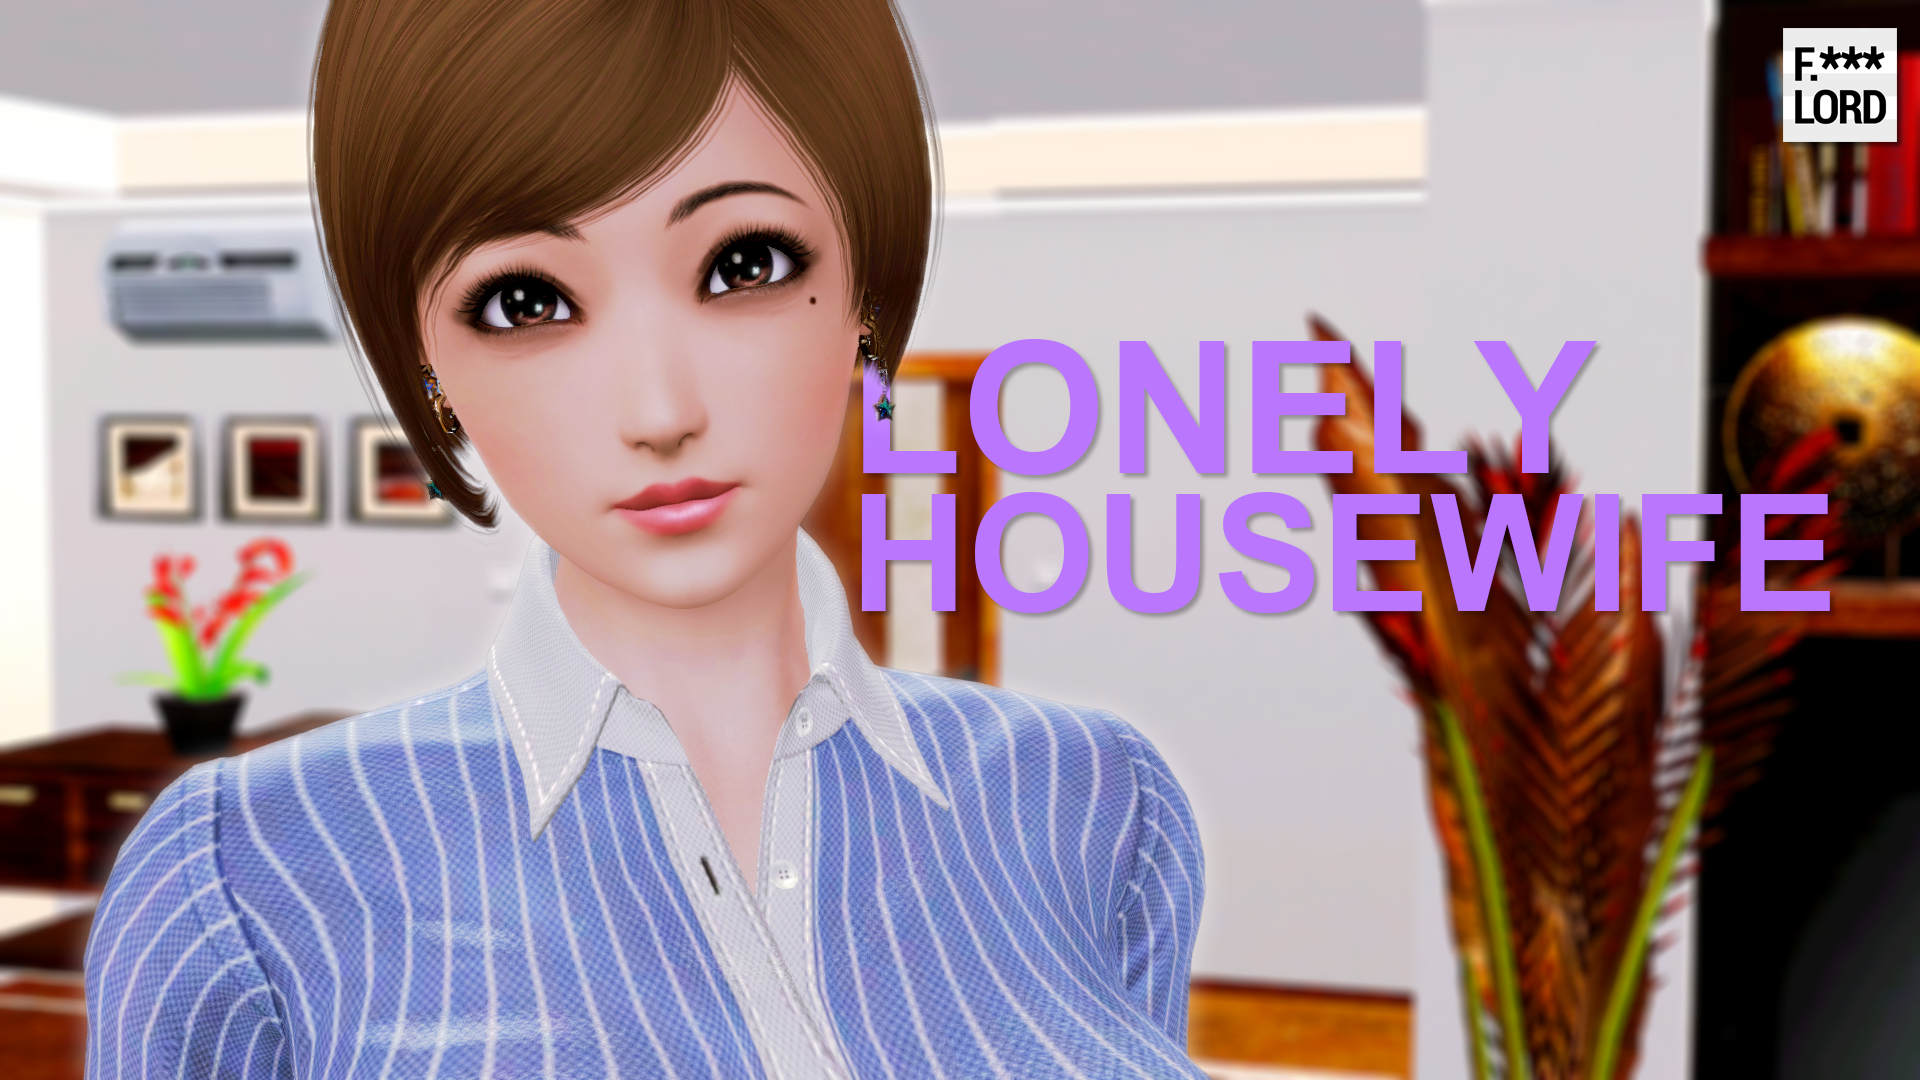 Lonely Housewife v1.0.0 COMPLETED - free game download, reviews, mega image